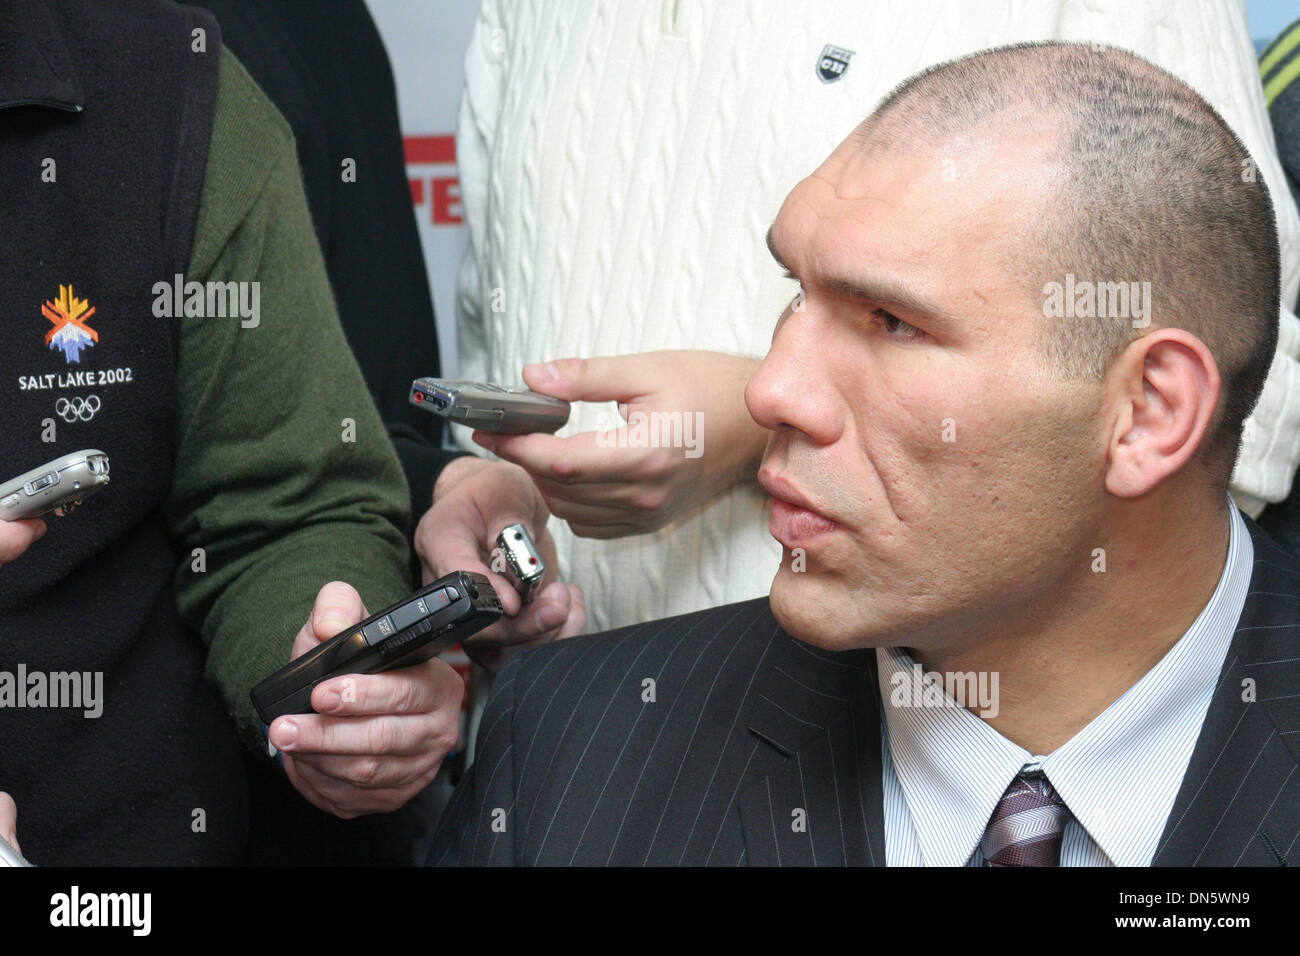 Russian heavy weight boxer Nikolai Valuev at the press conference in Moscow.(Credit Image: © PhotoXpress/ZUMA Press) RESTRICTIONS: North and South America Rights ONLY! Stock Photo